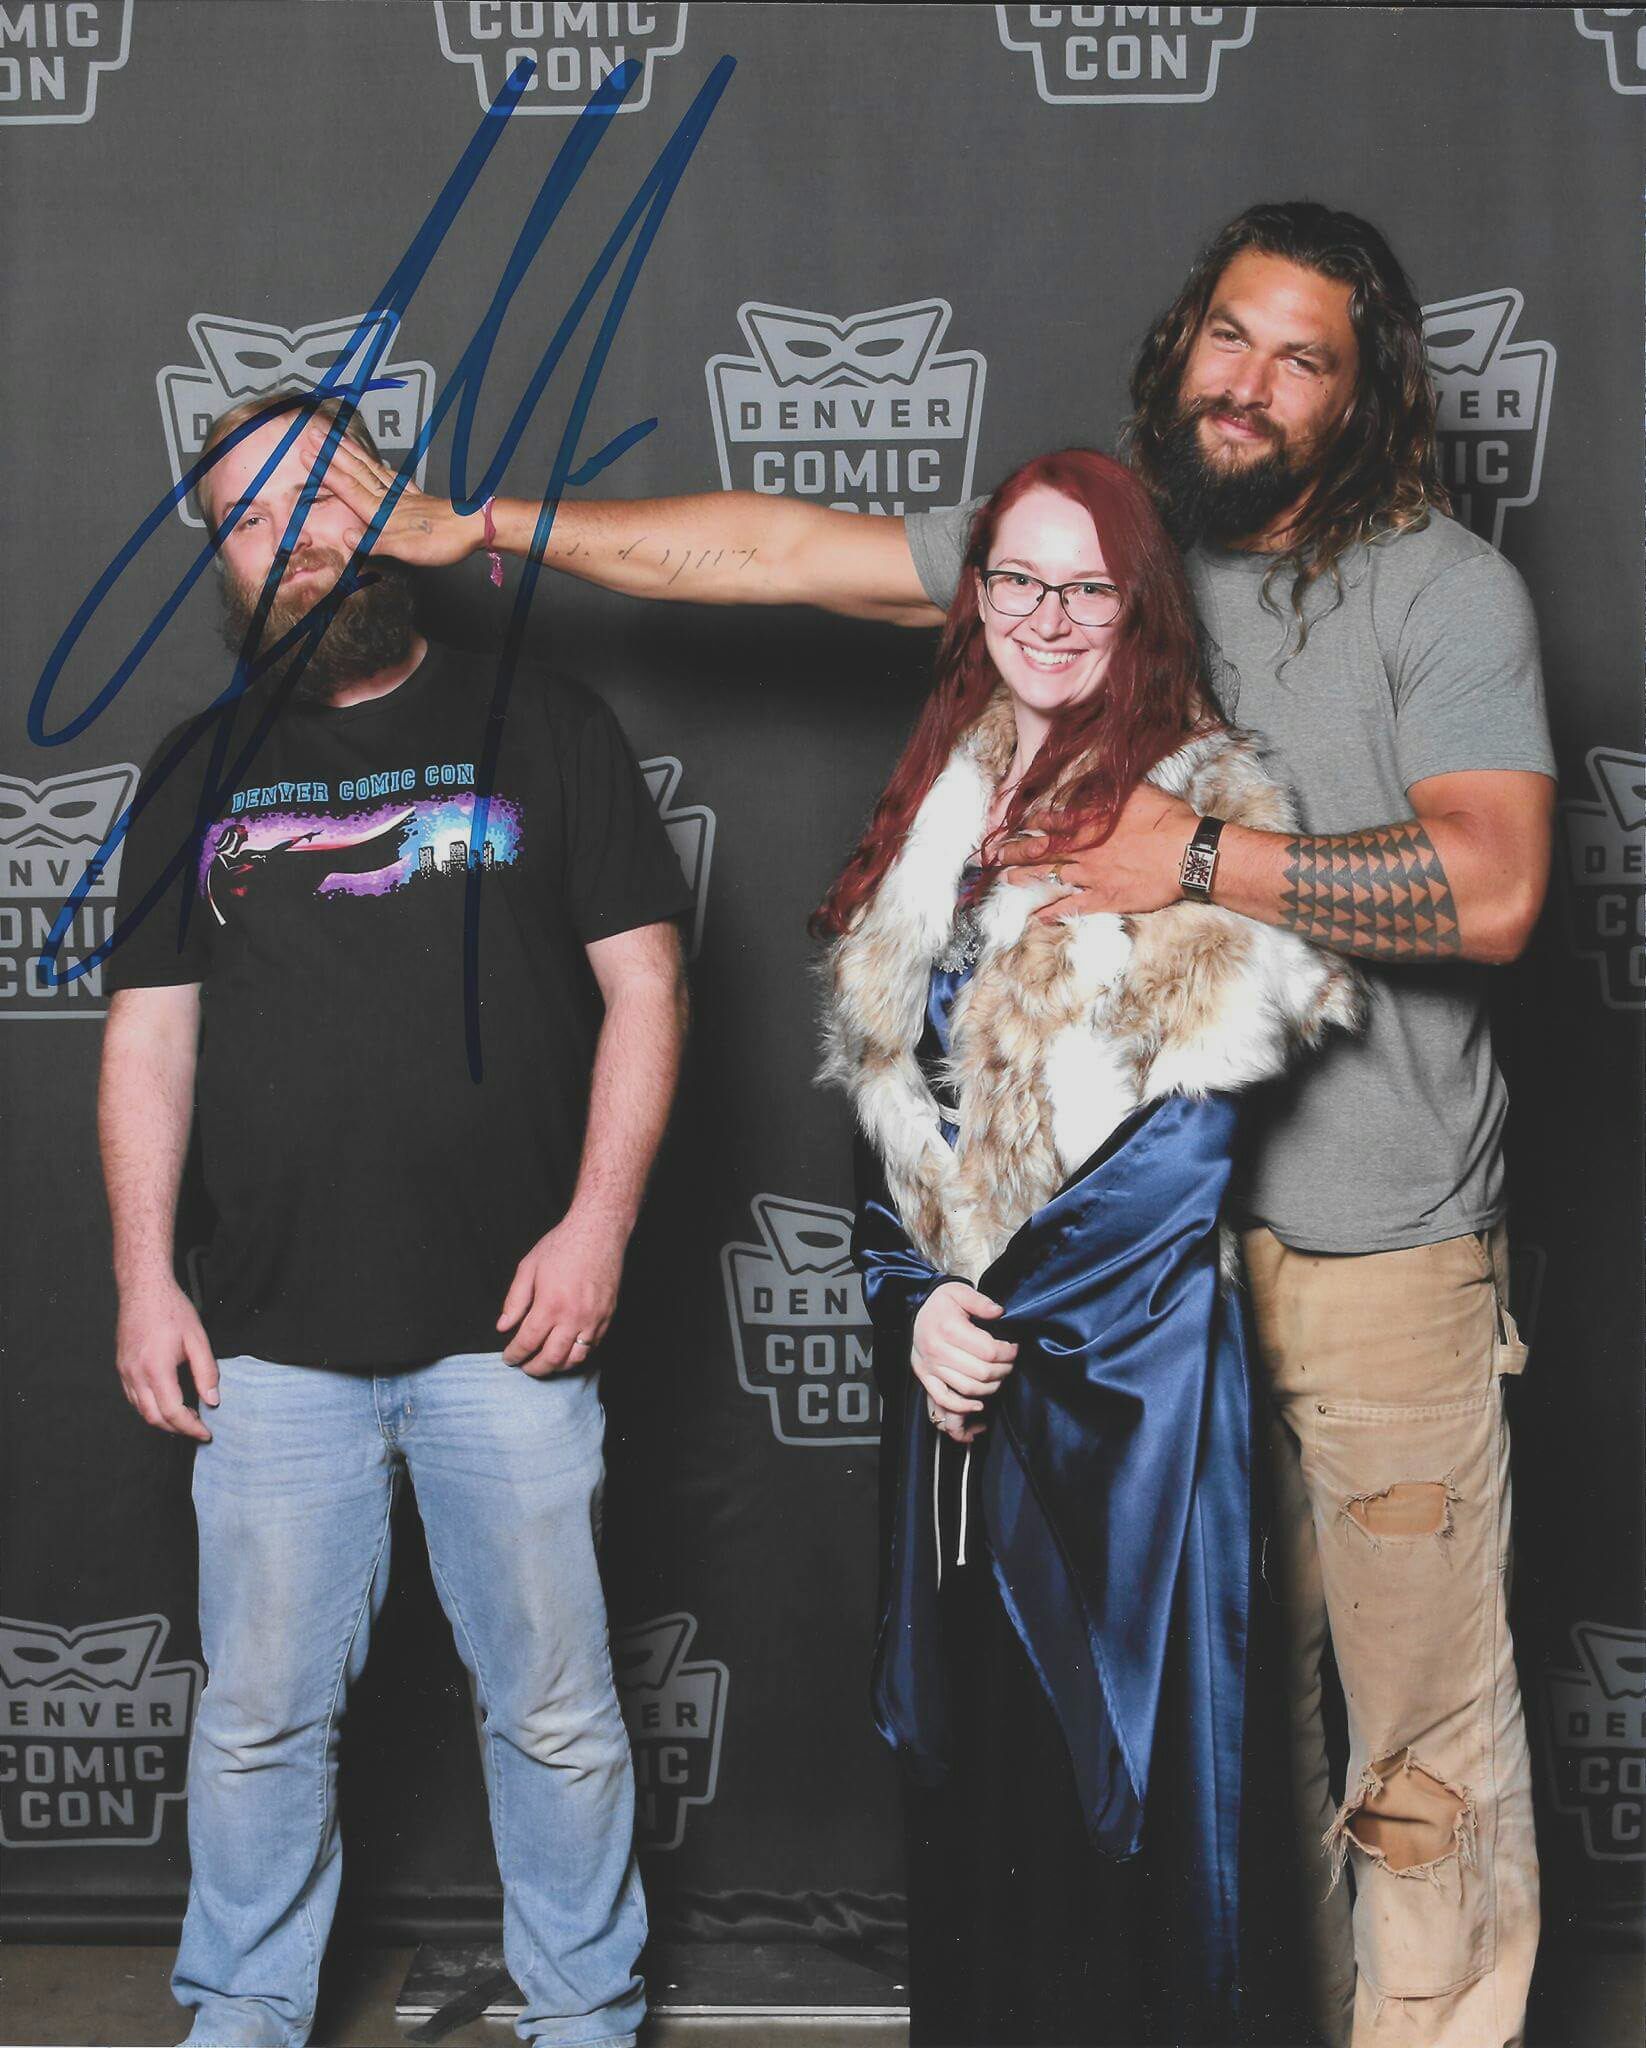 I told my husband I wanted a picture alone with Jason Momoa, but he wasn't comfortable with that.